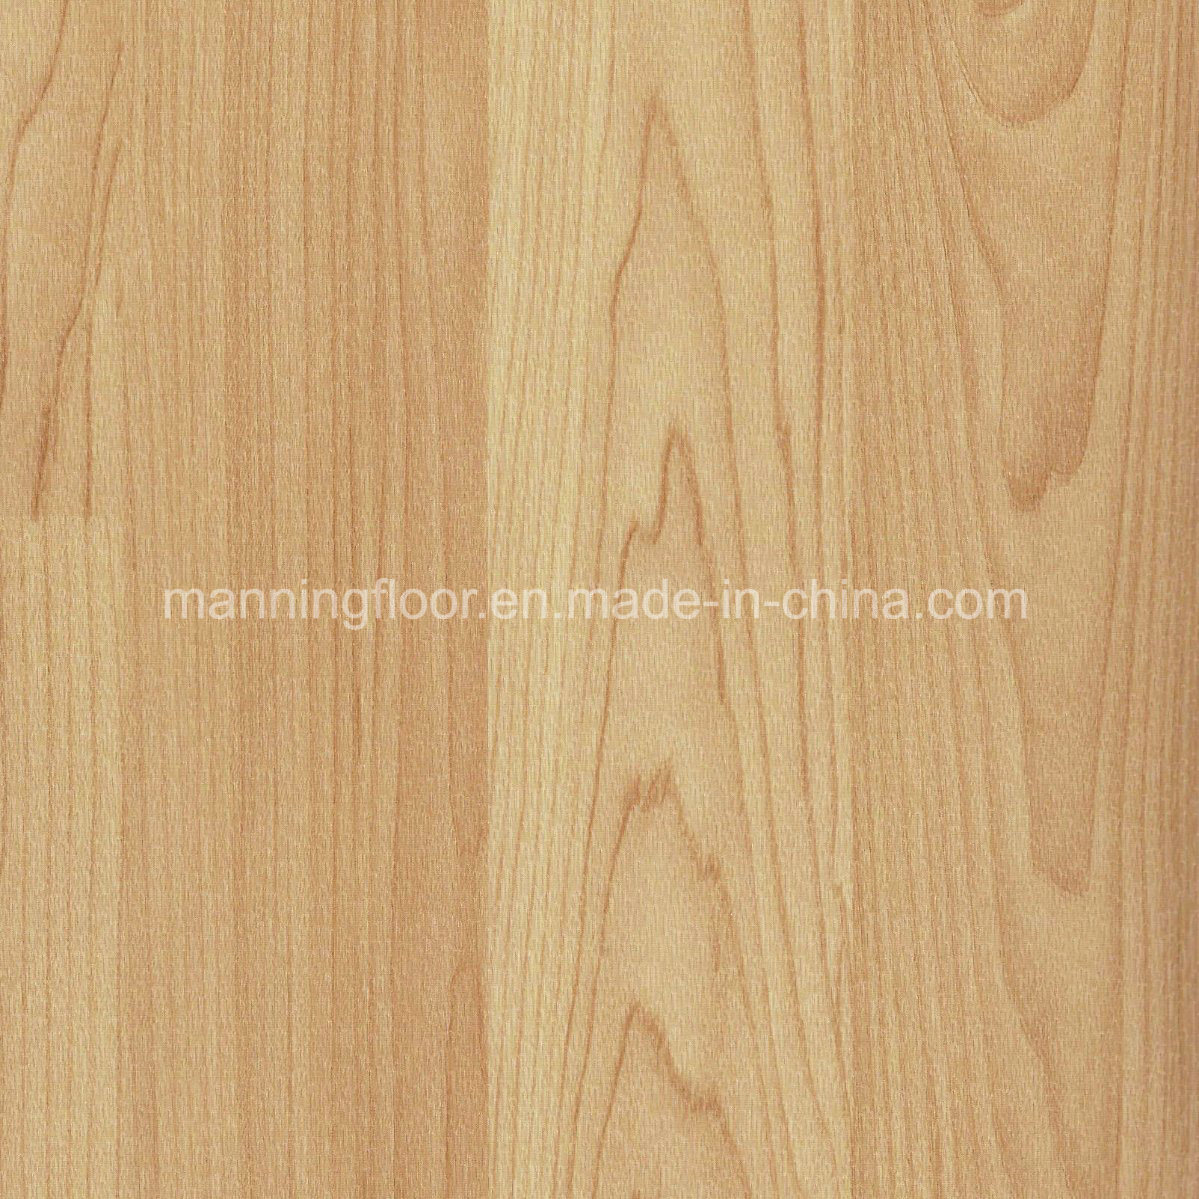 PVC Sports Flooring for Indoor Basketball Wood Pattern-8.0mm Thick Hj6819